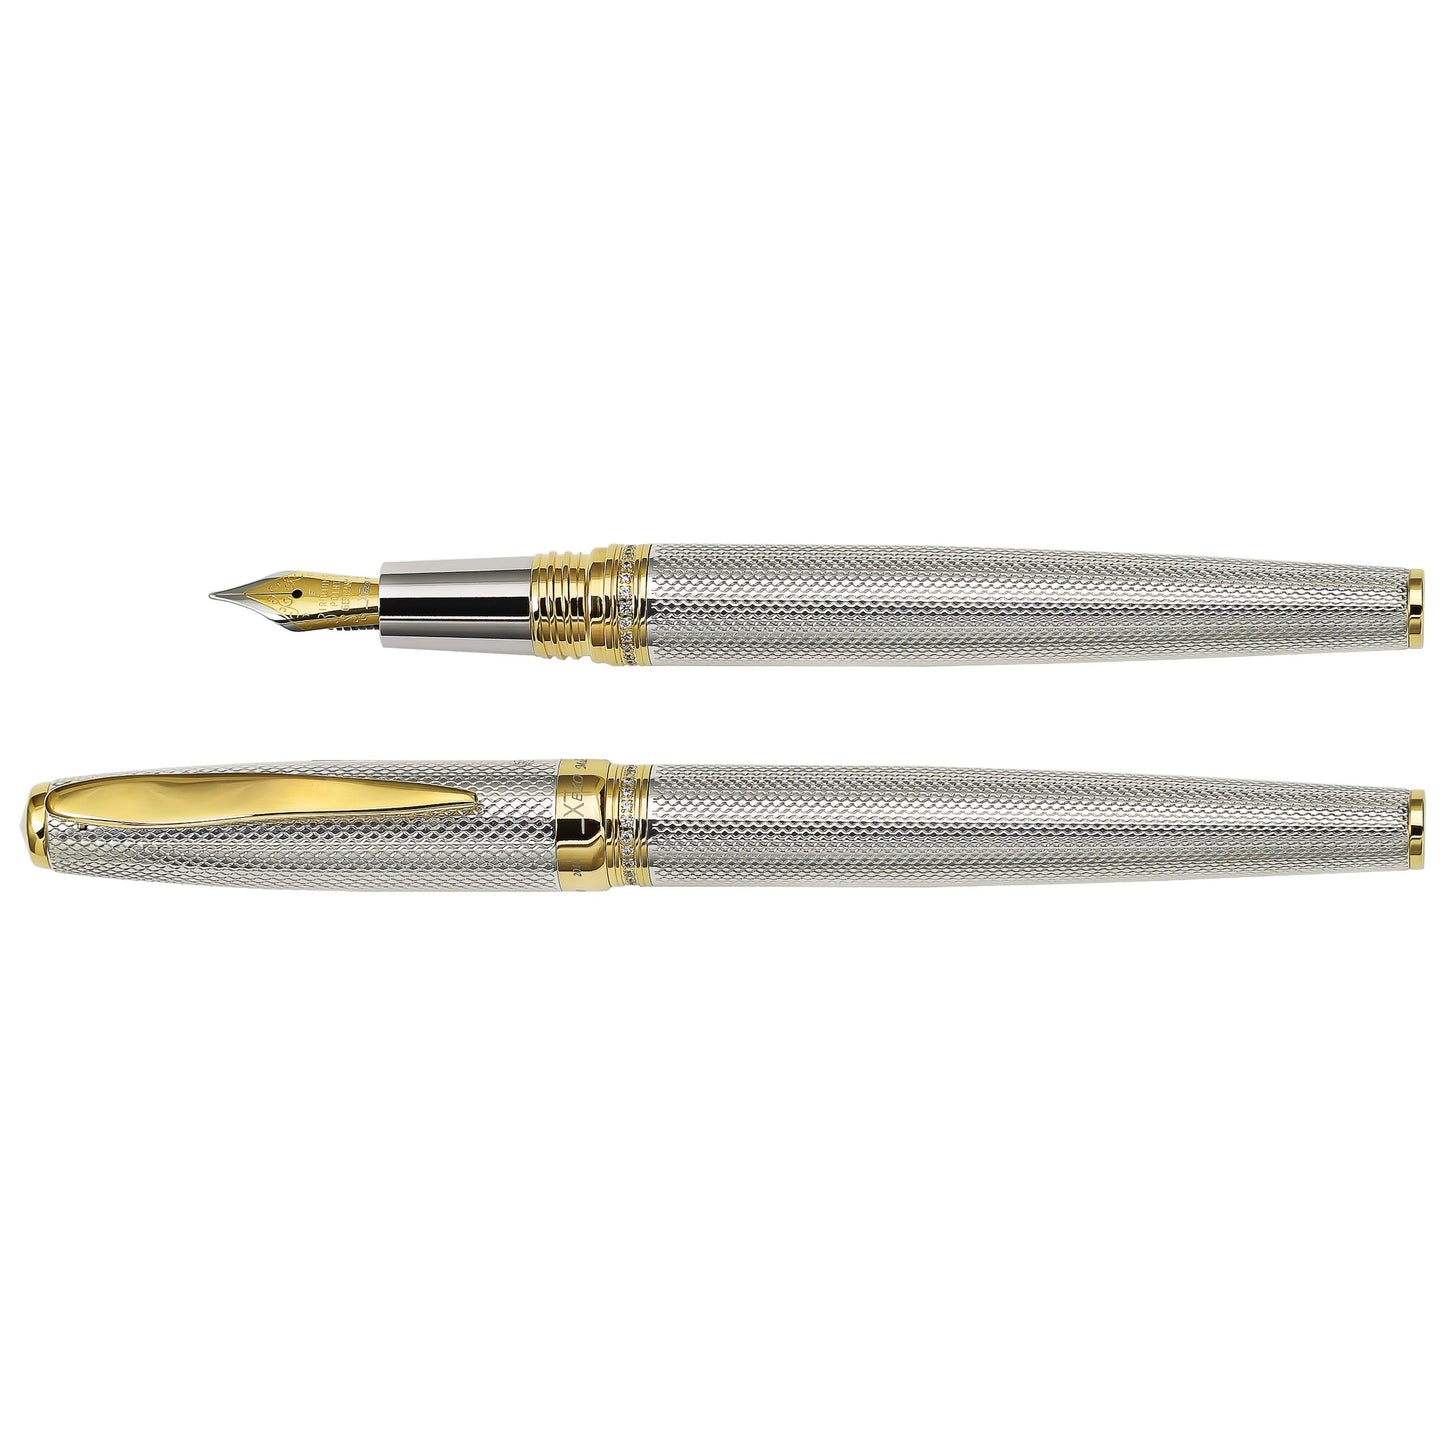 Xezo - Comparison between the angled view of the side of capped and uncapped  Maestro 925 Sterling Silver F-1 fountain pens